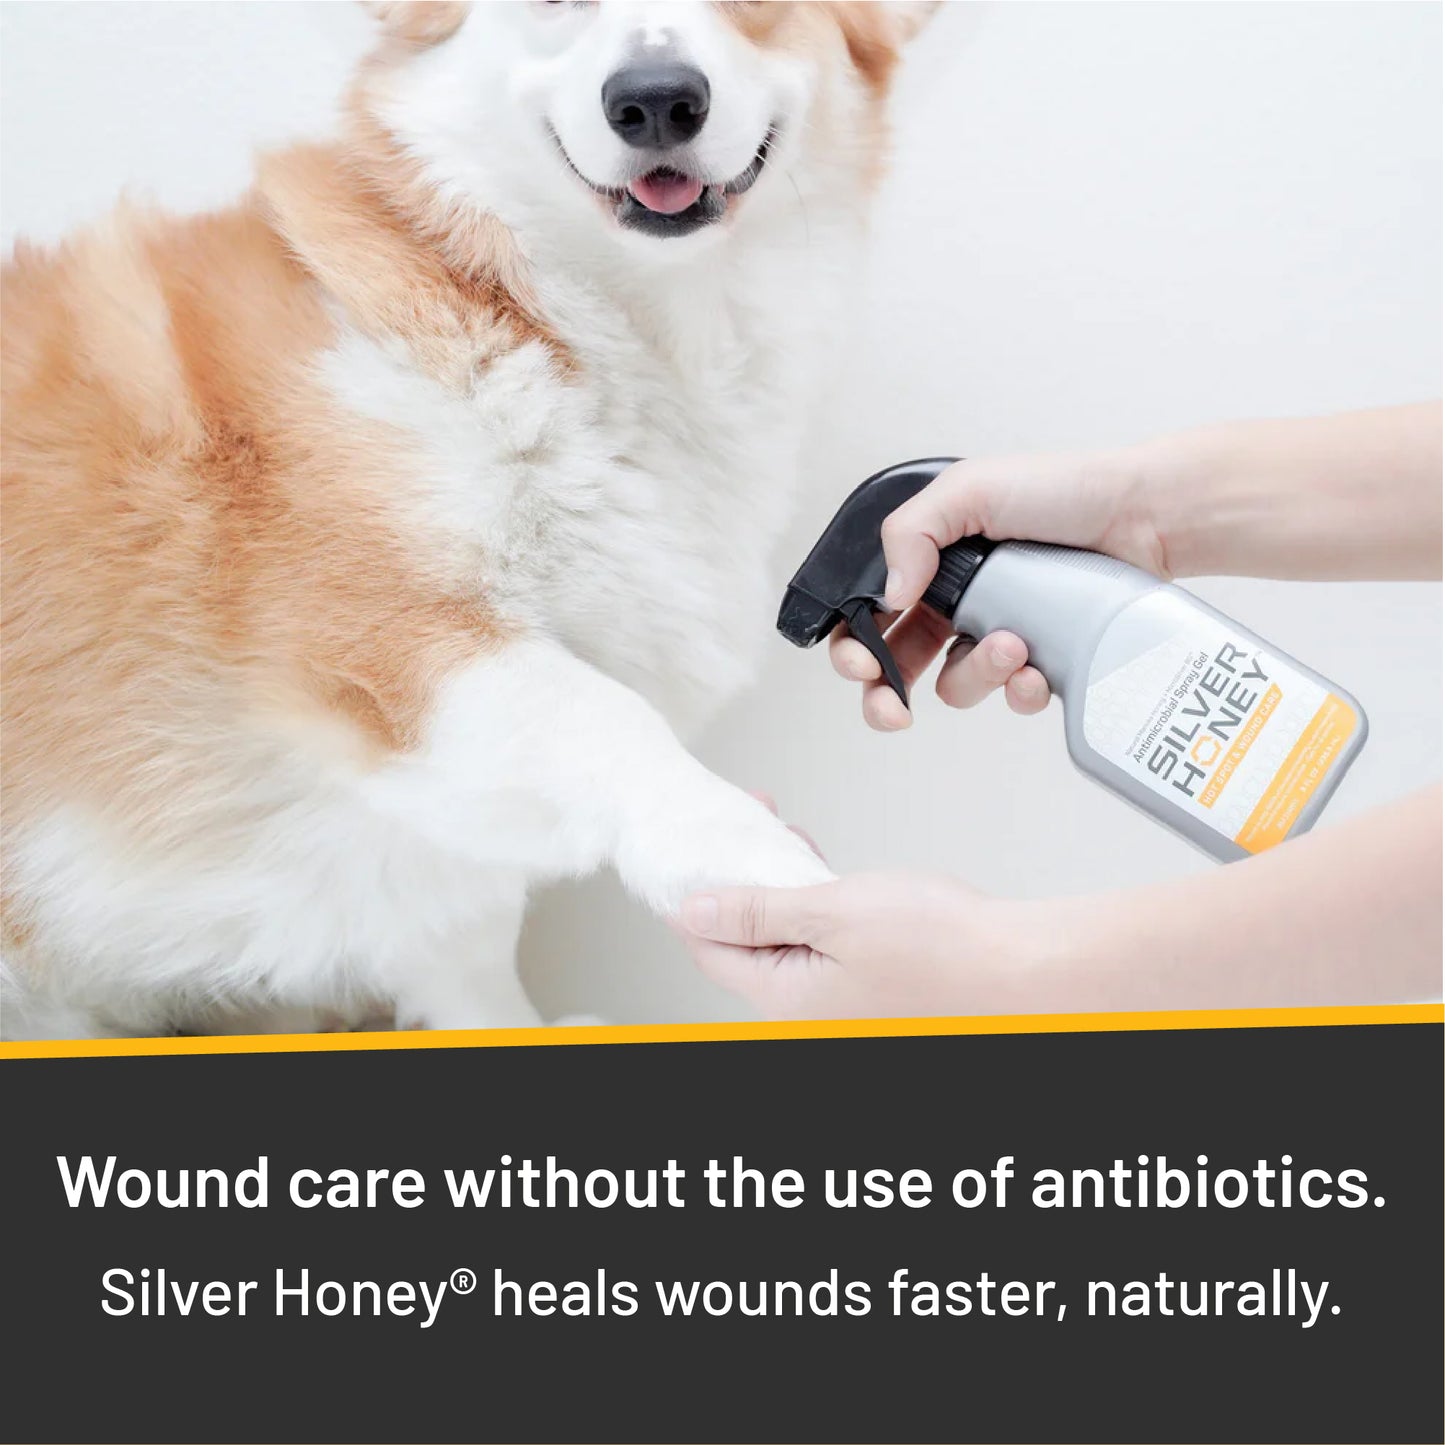 Smiling Corgi with Silver Honey Hot Spot spray gel being applied to his paw.  Wound care without the use of antibiotics.  Silver Honey heals wounds faster, naturally.